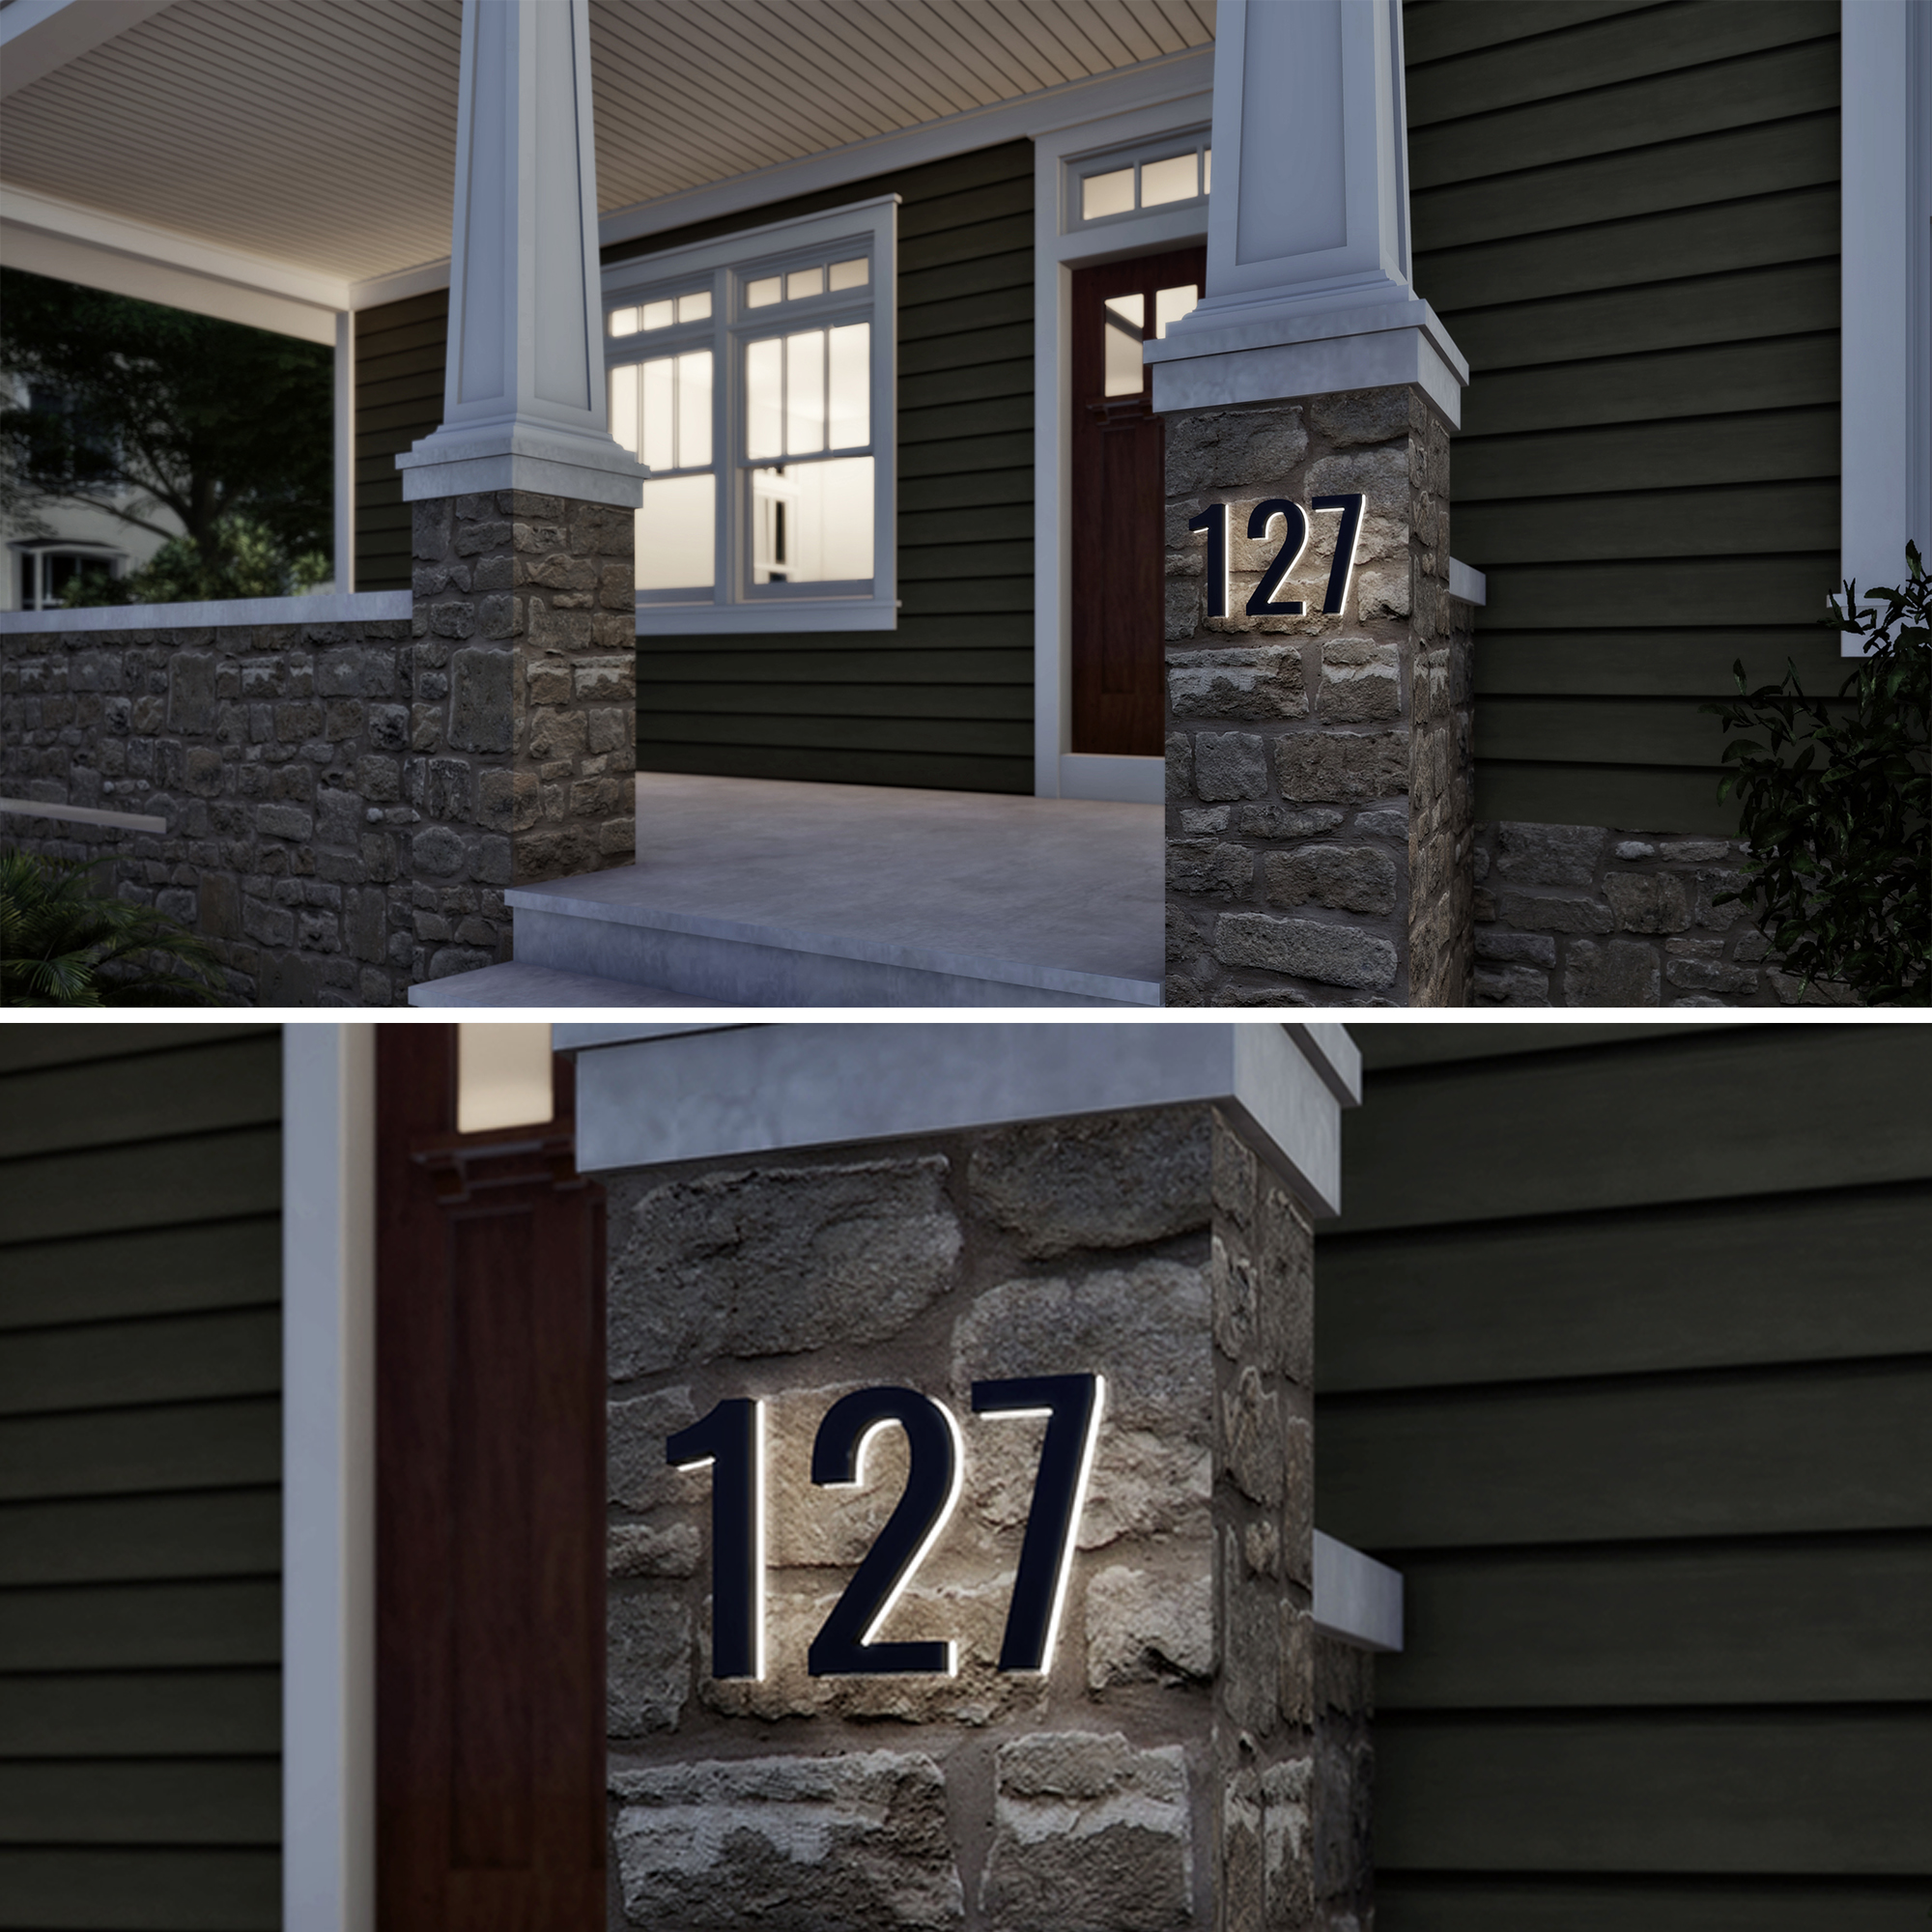 LumaNumbers Low-Voltage LED Address Numbers, Durable ABS-Polymer Lighted House Numbers, 5-inch, Weather-Proof, Illuminated (Bronze, 7) Power Source Required, Back-plate Recommended - image 3 of 5